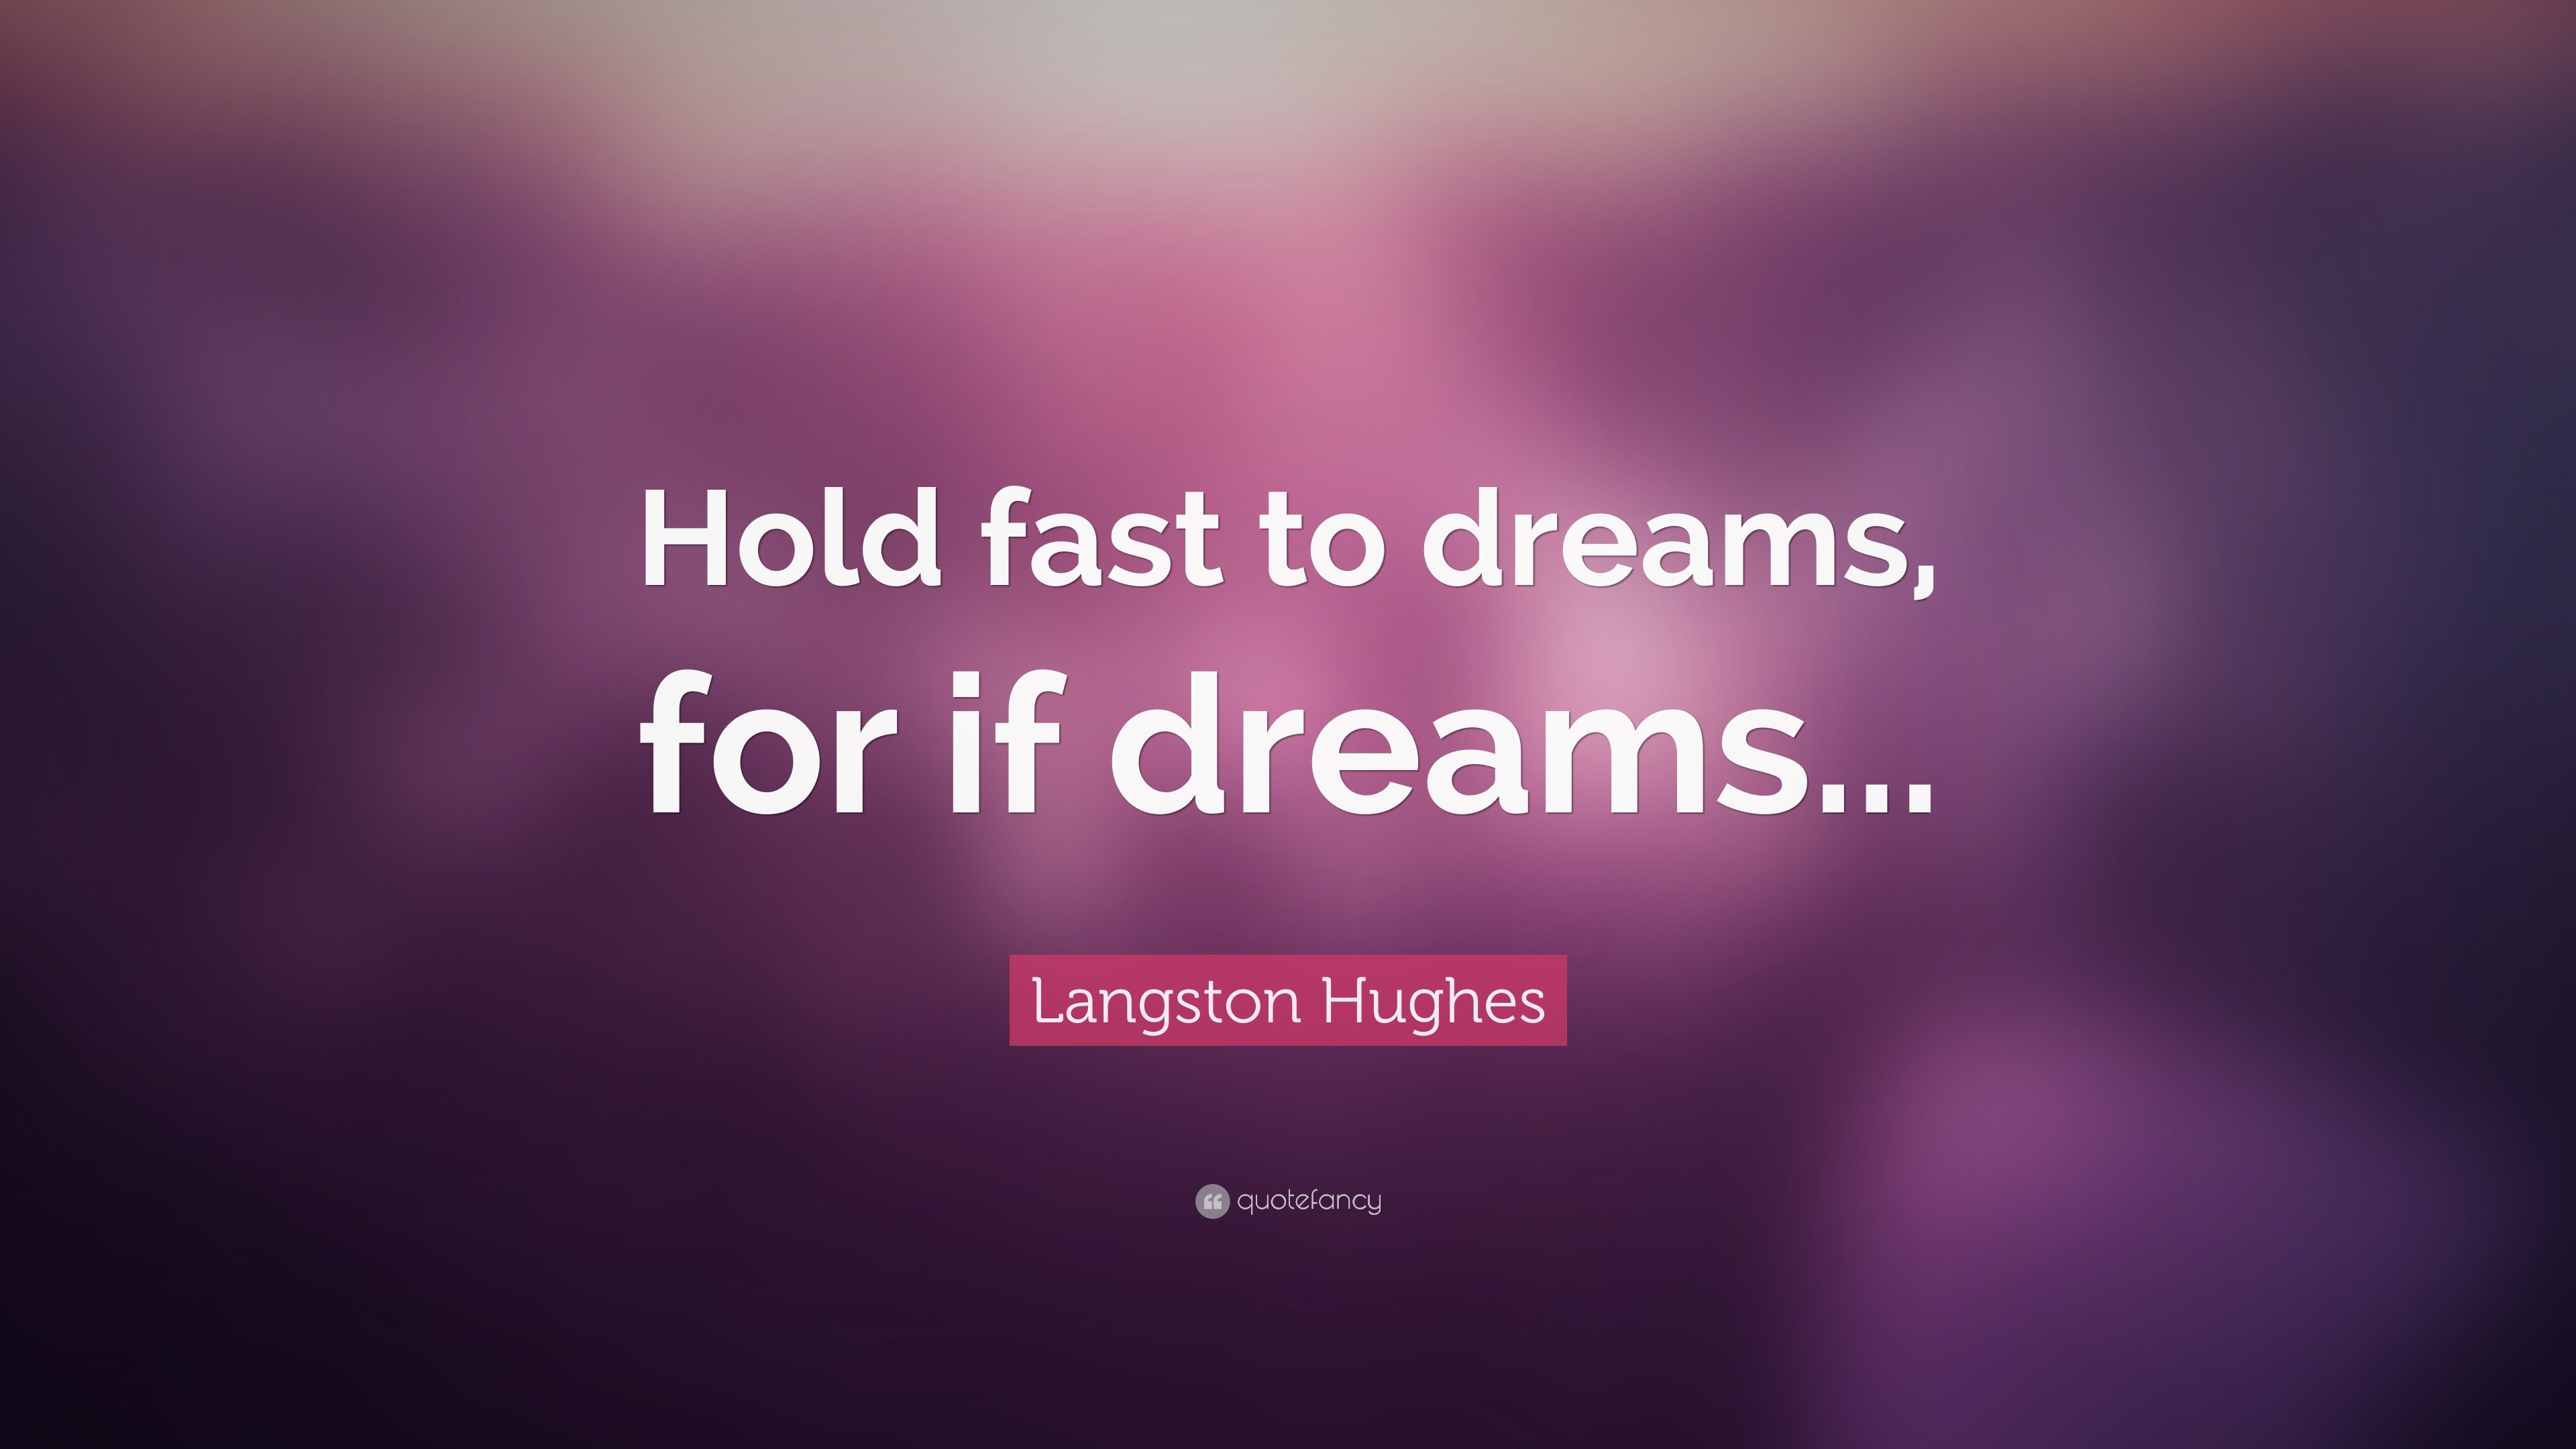 hold fast to dreams by andrea davis pinkney